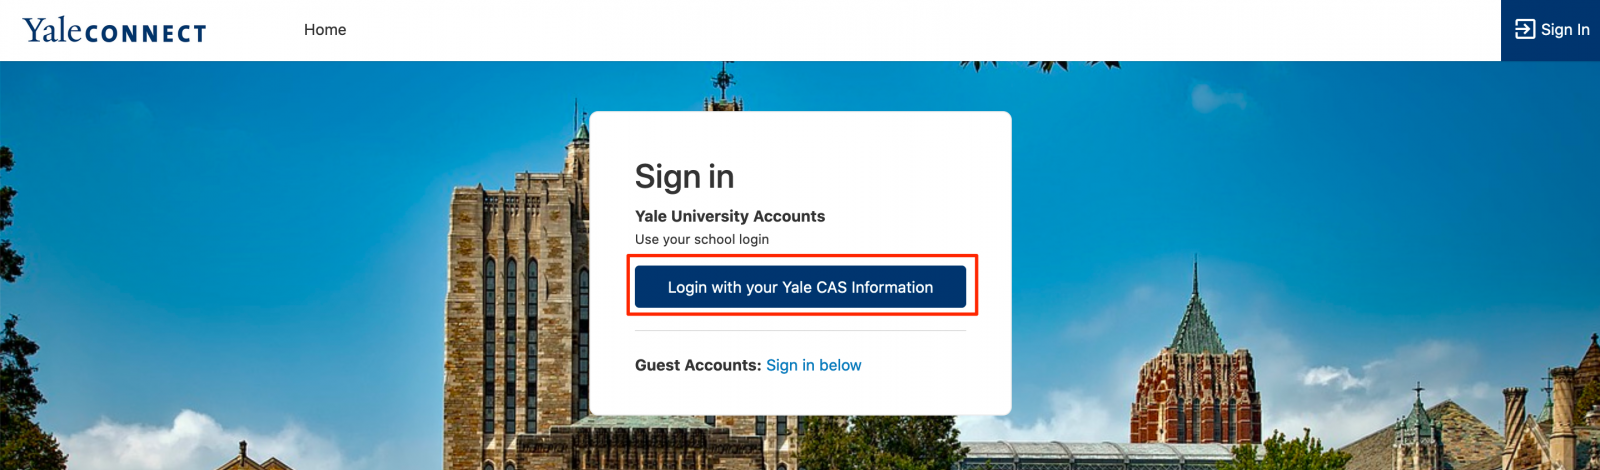 Yale Connect Login with CAS info